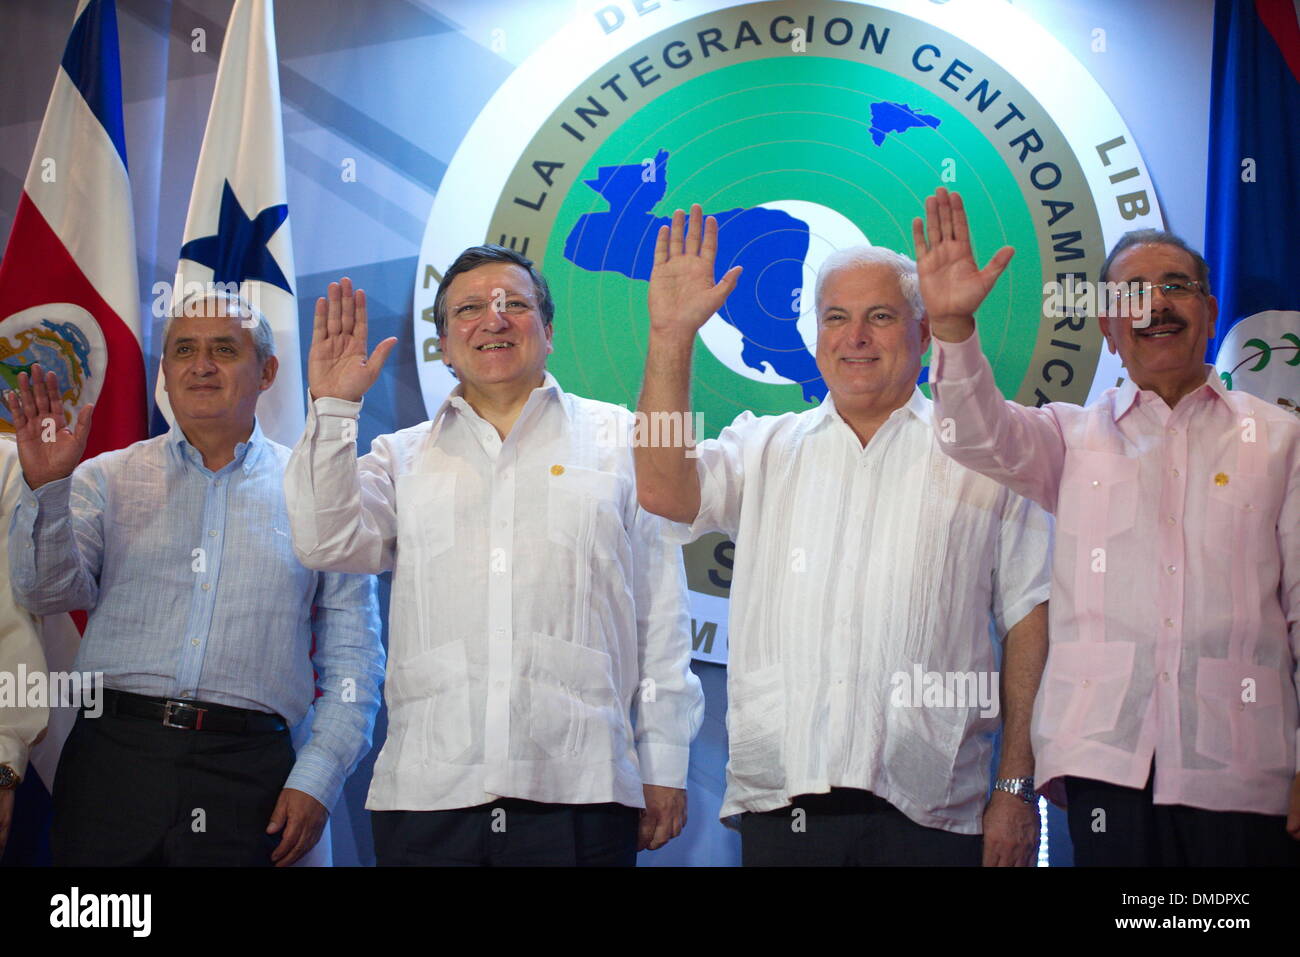 Rio Hato, Panama. 13th Dec, 2013. (From L to R) Guatemala's President Otto Perez Molina, European Commission President Jose Manuel Barroso, Panama's President Ricardo Martinelli and President of the Dominican Republic Danilo Medina pose for a photo during the 42nd Summit of Central American Integration System in Cocle, Panama, on Dec. 13, 2013. Credit:  Mauricio Valenzuela/Xinhua/Alamy Live News Stock Photo